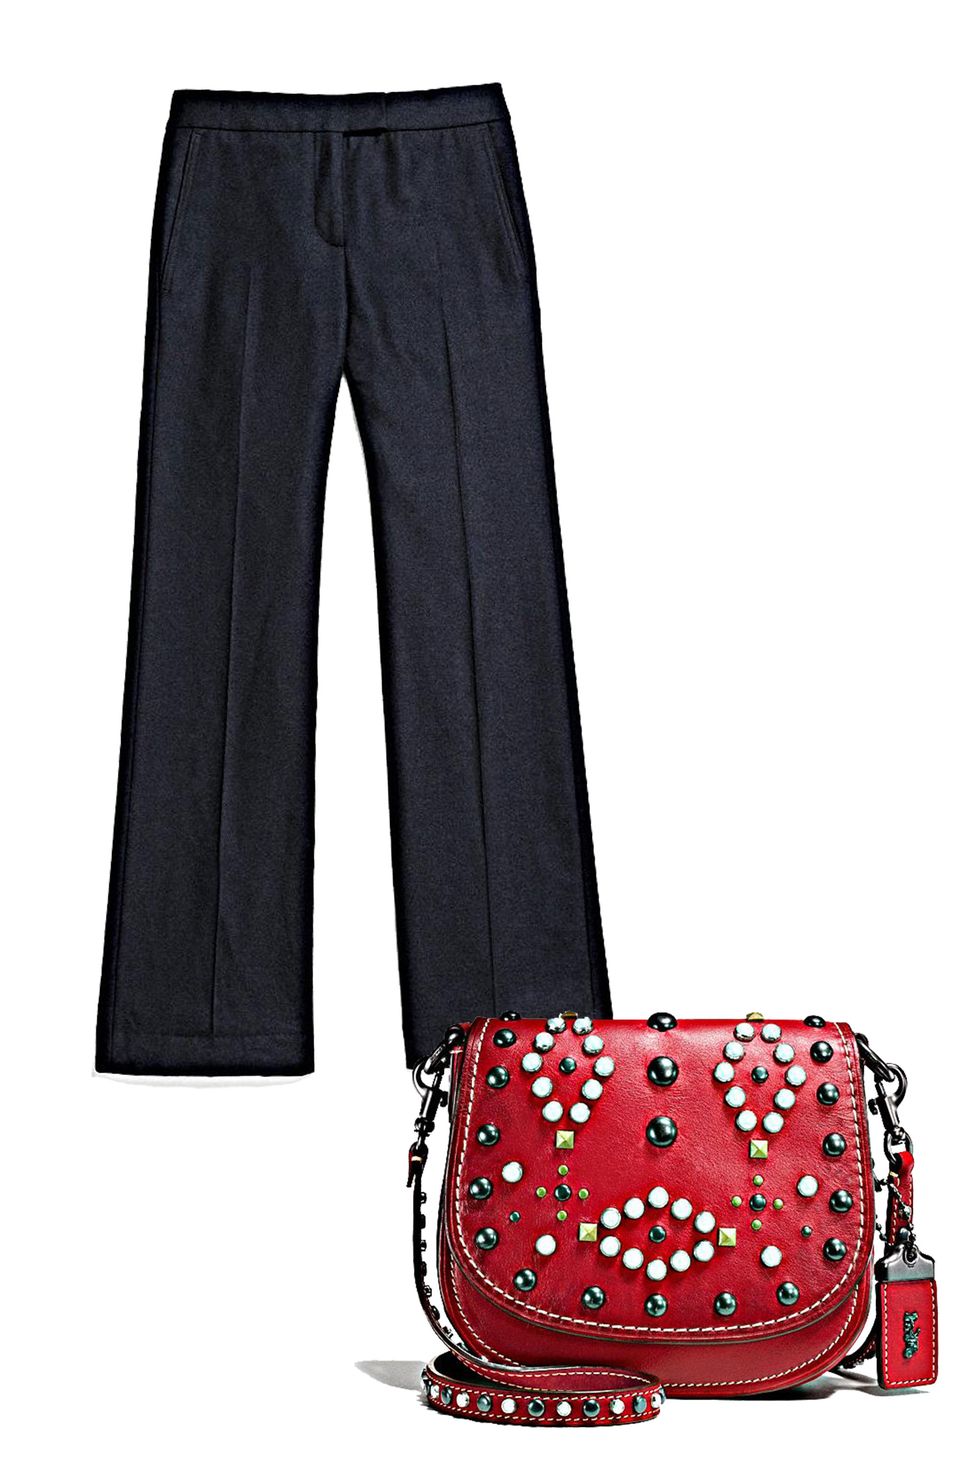 <p>Nine-to-five dressing doesn't have to be boring. Add style to your staples&nbsp;with structured and tailored pieces—like this perfect pair of trousers and studded Saddle Bag that holds the essentials.
</p><p><br>
</p><p><em data-redactor-tag="em">Coach 1941 Tailored Pants, $395, <a rel="noskim" href="http://www.coach.com/coach-designer-pants-tailored-pants/56306.html?CID=D_B_HBZ_11849" target="_blank">coach.com</a>; Coach 1941 Western Rivets Saddle Bag 17, $450, <a rel="noskim" href="http://www.coach.com/coach-designer-crossbody-western-rivets-saddle-bag-17-in-glovetanned-leather/56564.html?dwvar_color=BPF8Q&amp;CID=D_B_HBZ_11850" target="_blank">coach.com</a></em><span class="redactor-invisible-space" data-verified="redactor" data-redactor-tag="span" data-redactor-class="redactor-invisible-space"><em data-redactor-tag="em"></em></span><br></p>